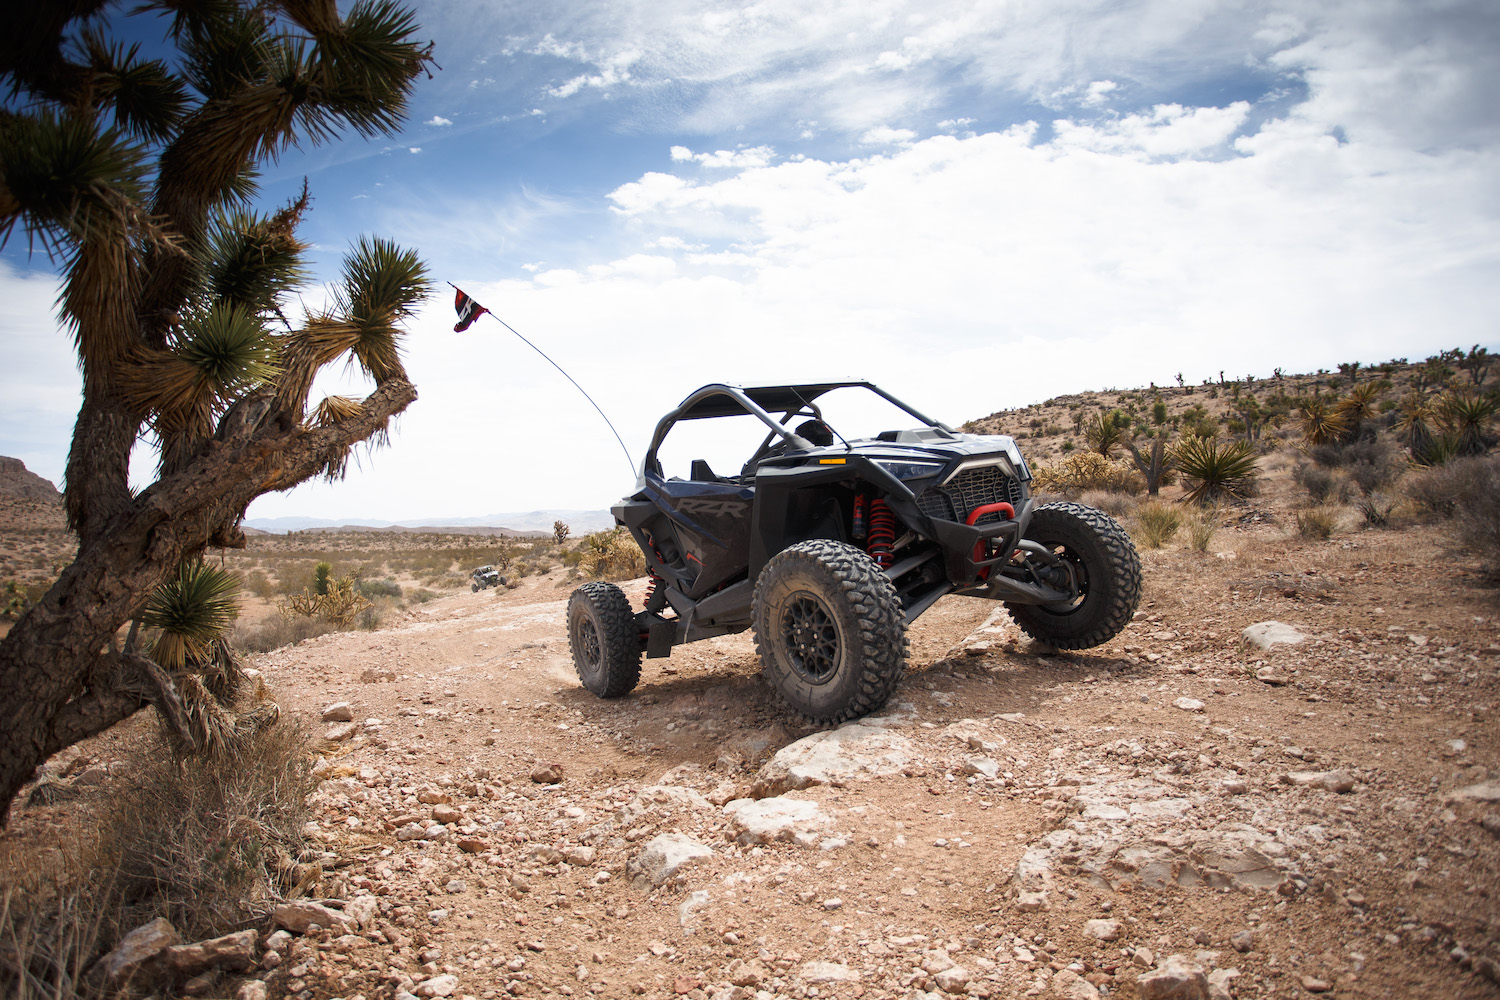 Close up of Polaris RZR Pro R front end driving up a rocky trail in the desert in front of a cactus.